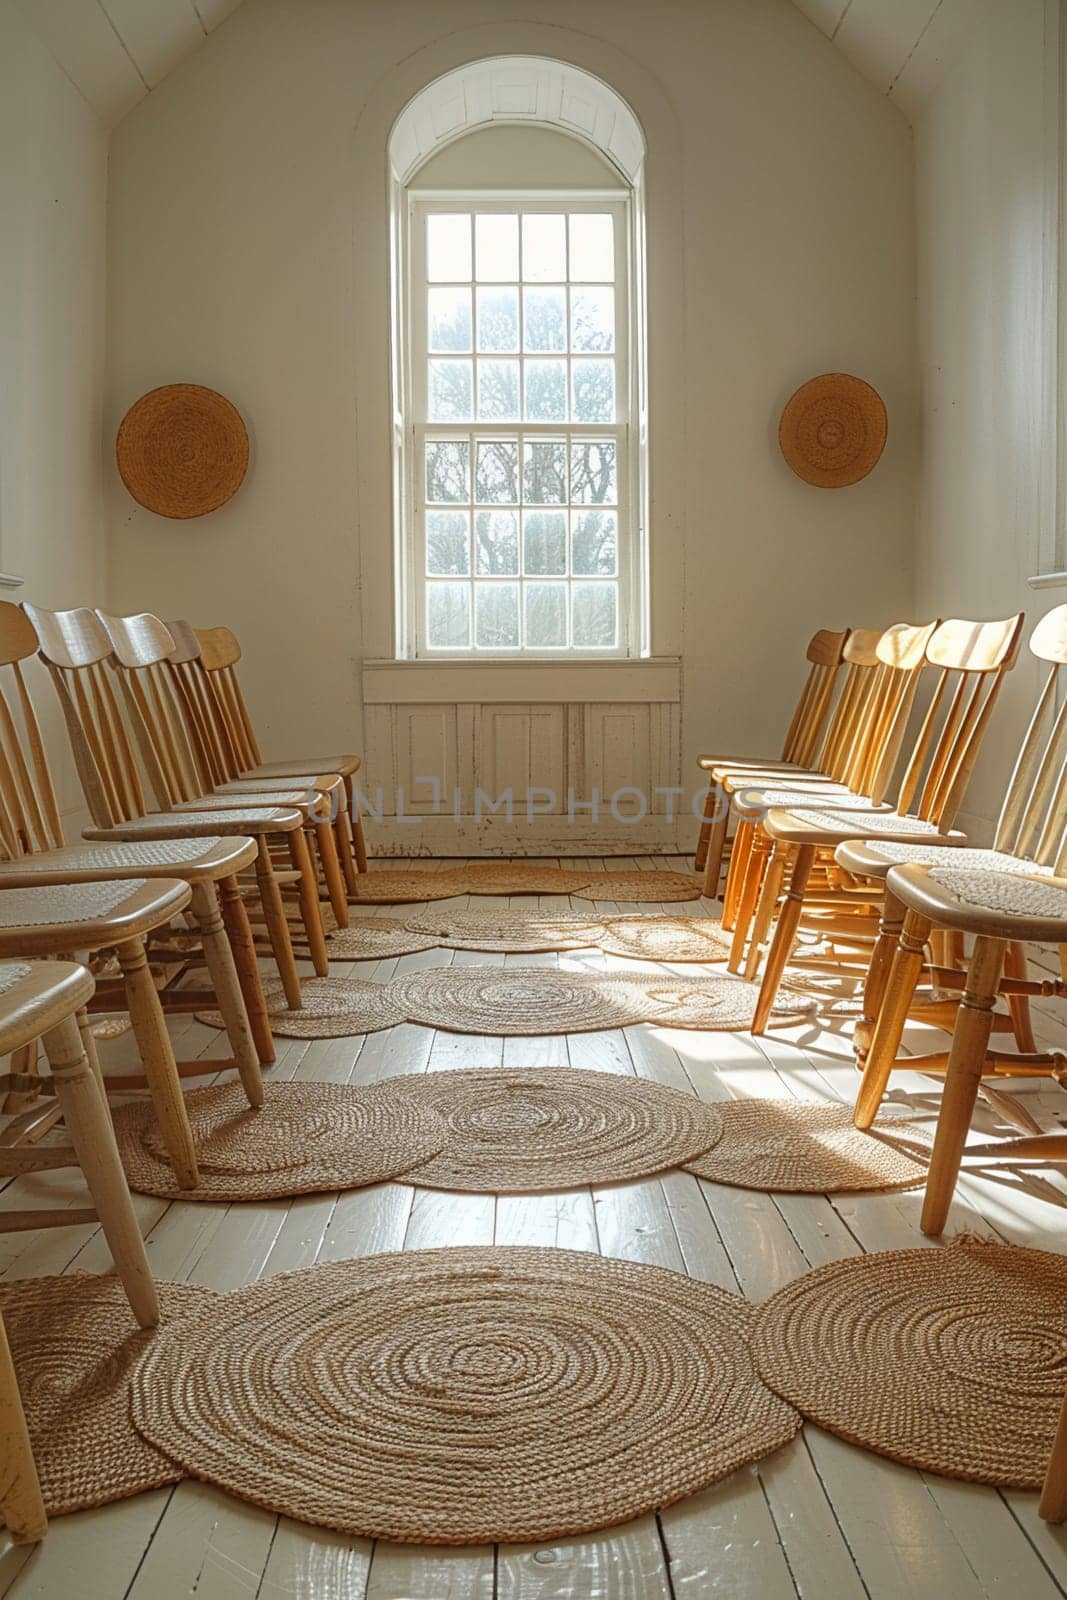 Quaker Simplicity in a Plain Meeting Room by Benzoix